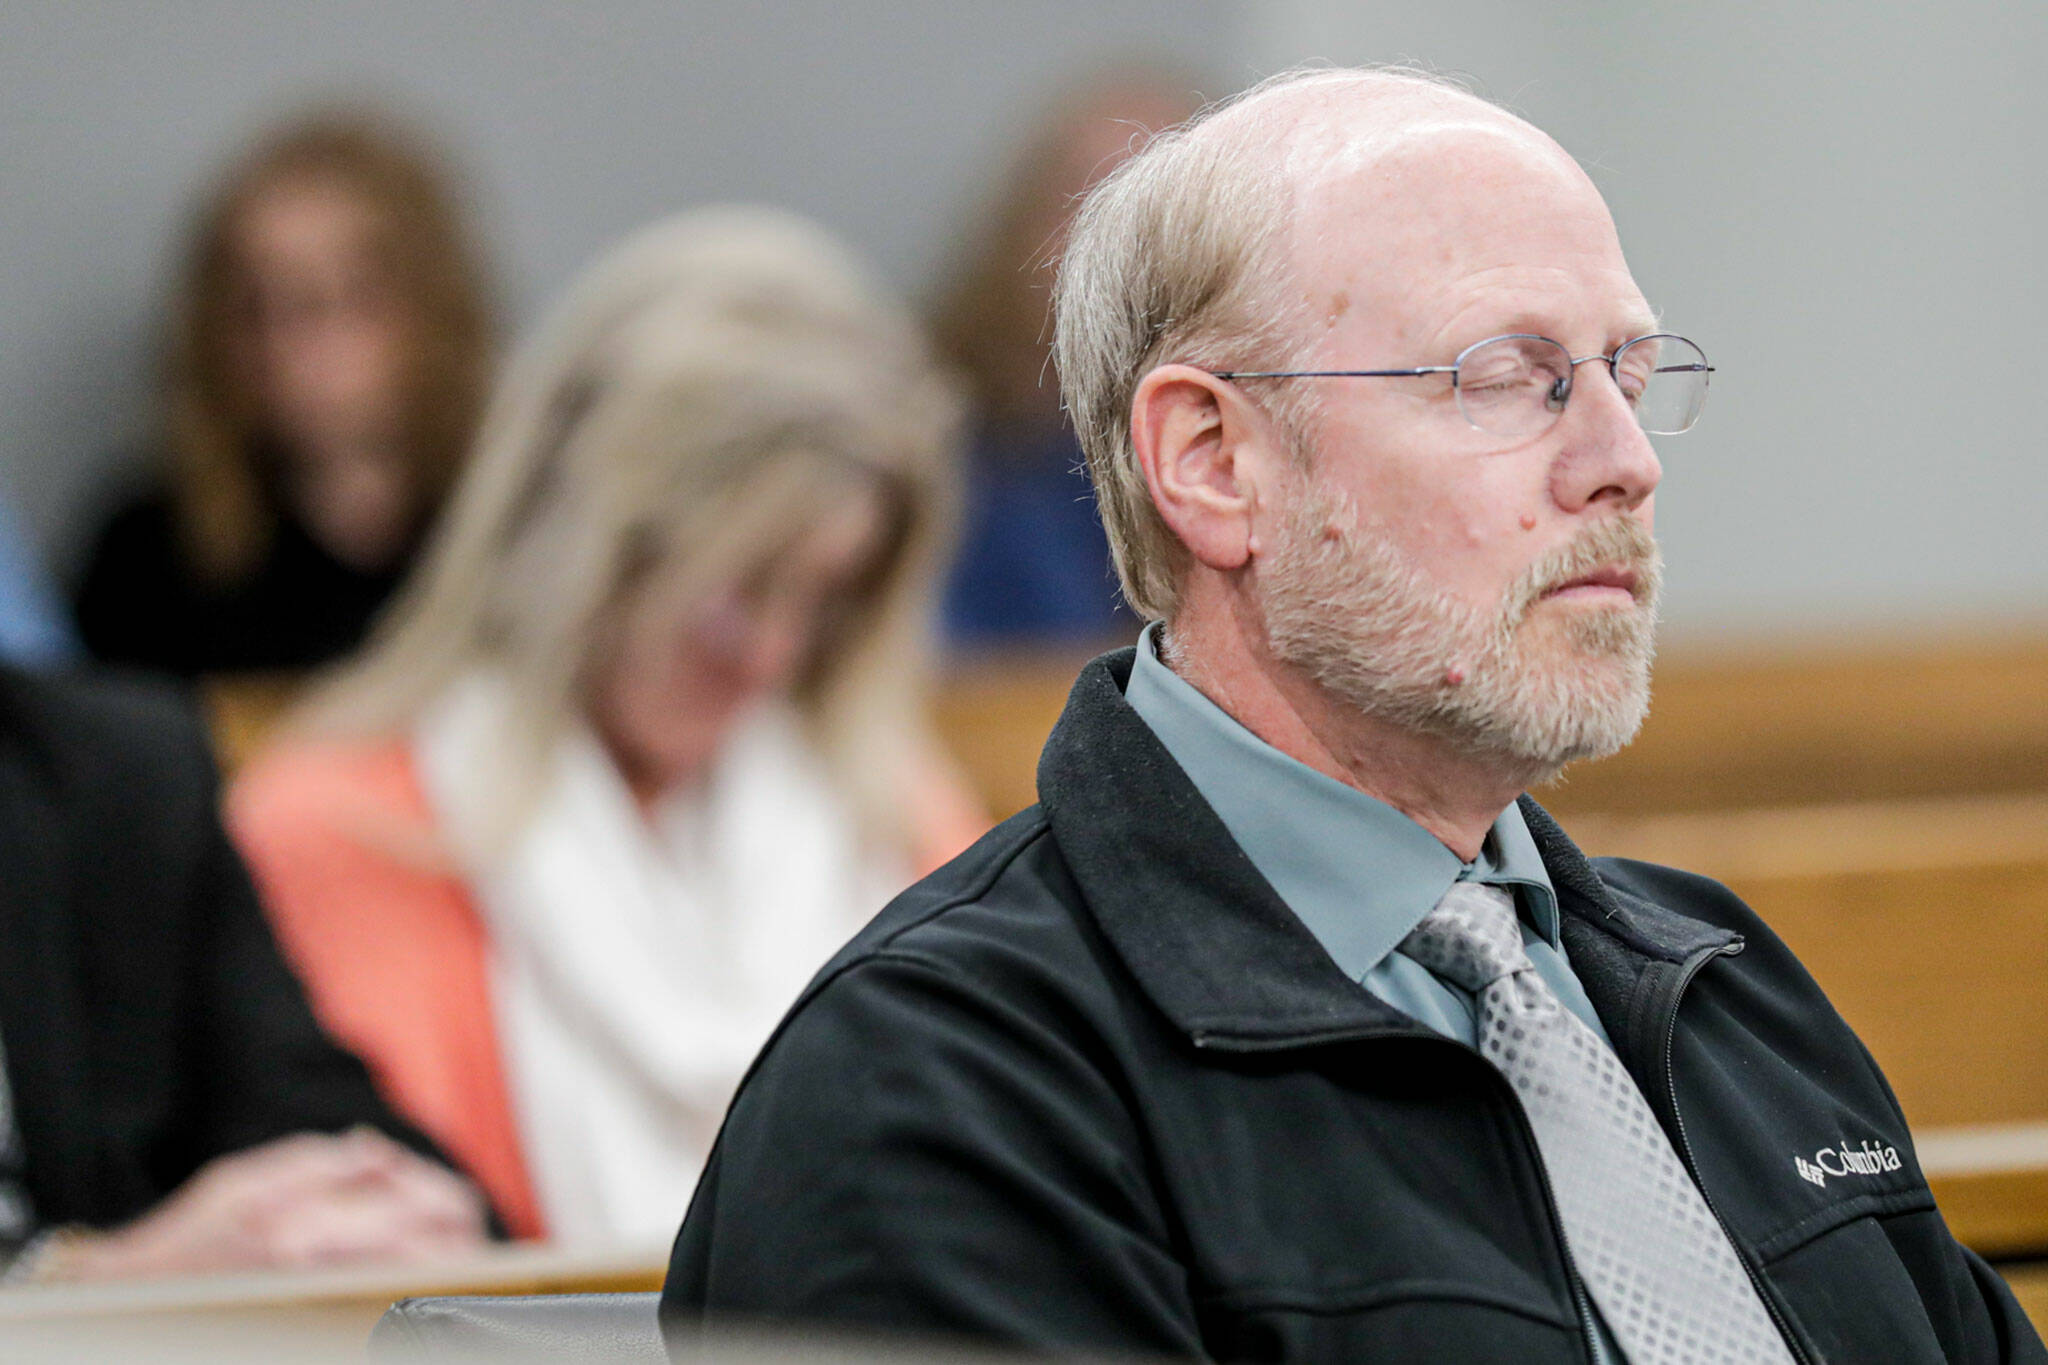 Kenneth Parker listens as his sentence is handed down Friday in Snohomish County Superior Court in Everett. (Kevin Clark / The Herald)